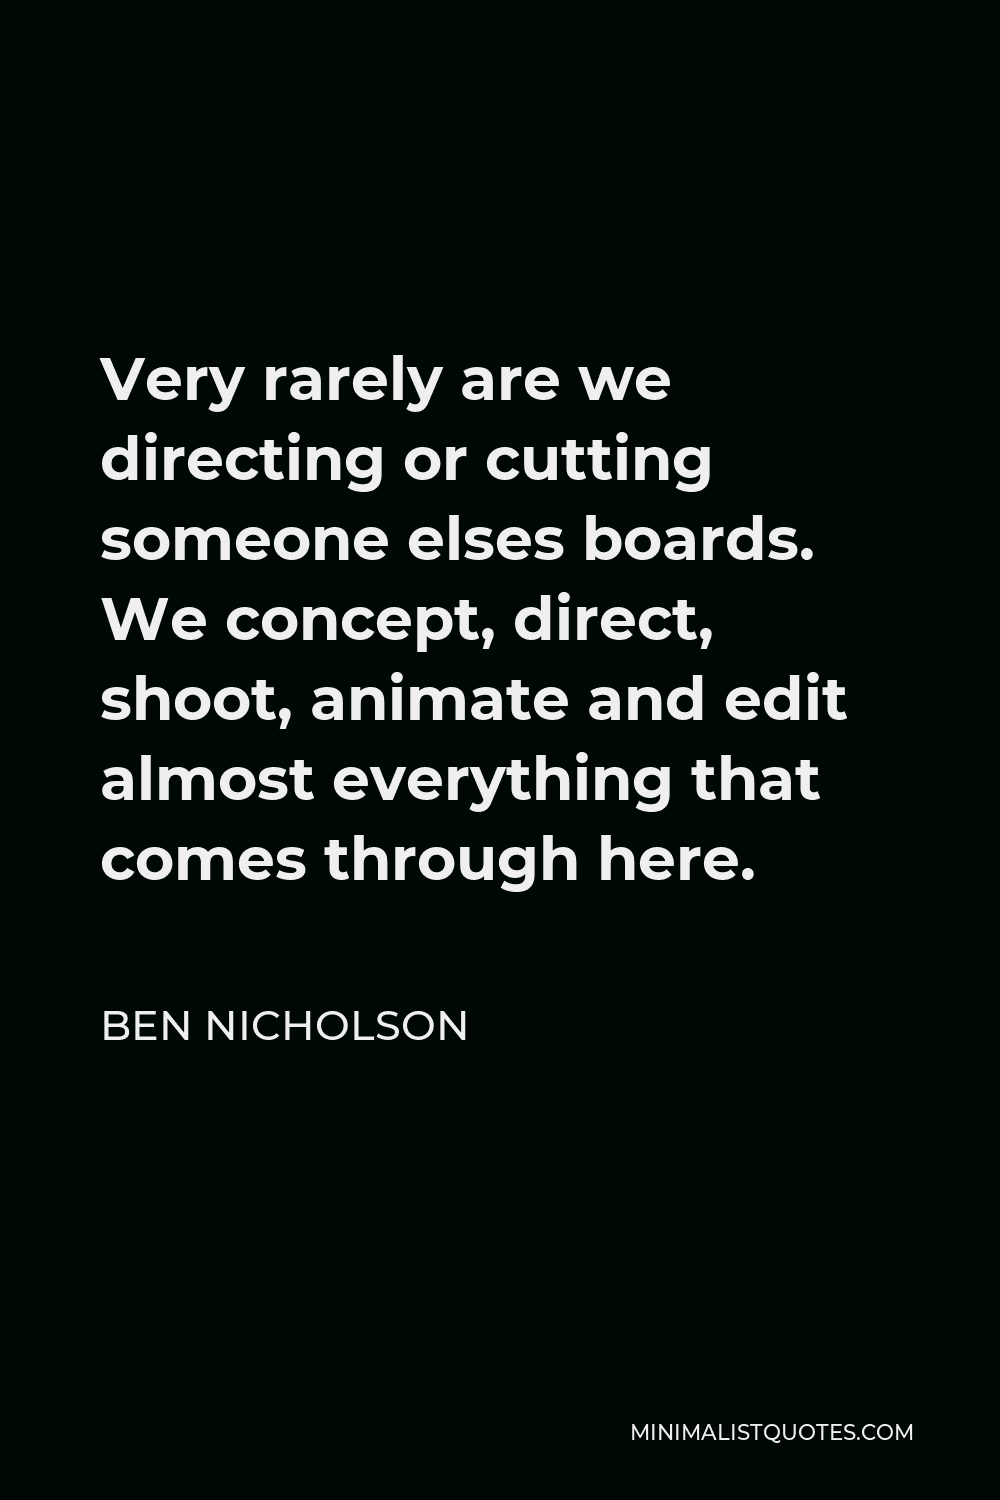 Ben Nicholson Quote - Very rarely are we directing or cutting someone elses boards. We concept, direct, shoot, animate and edit almost everything that comes through here.